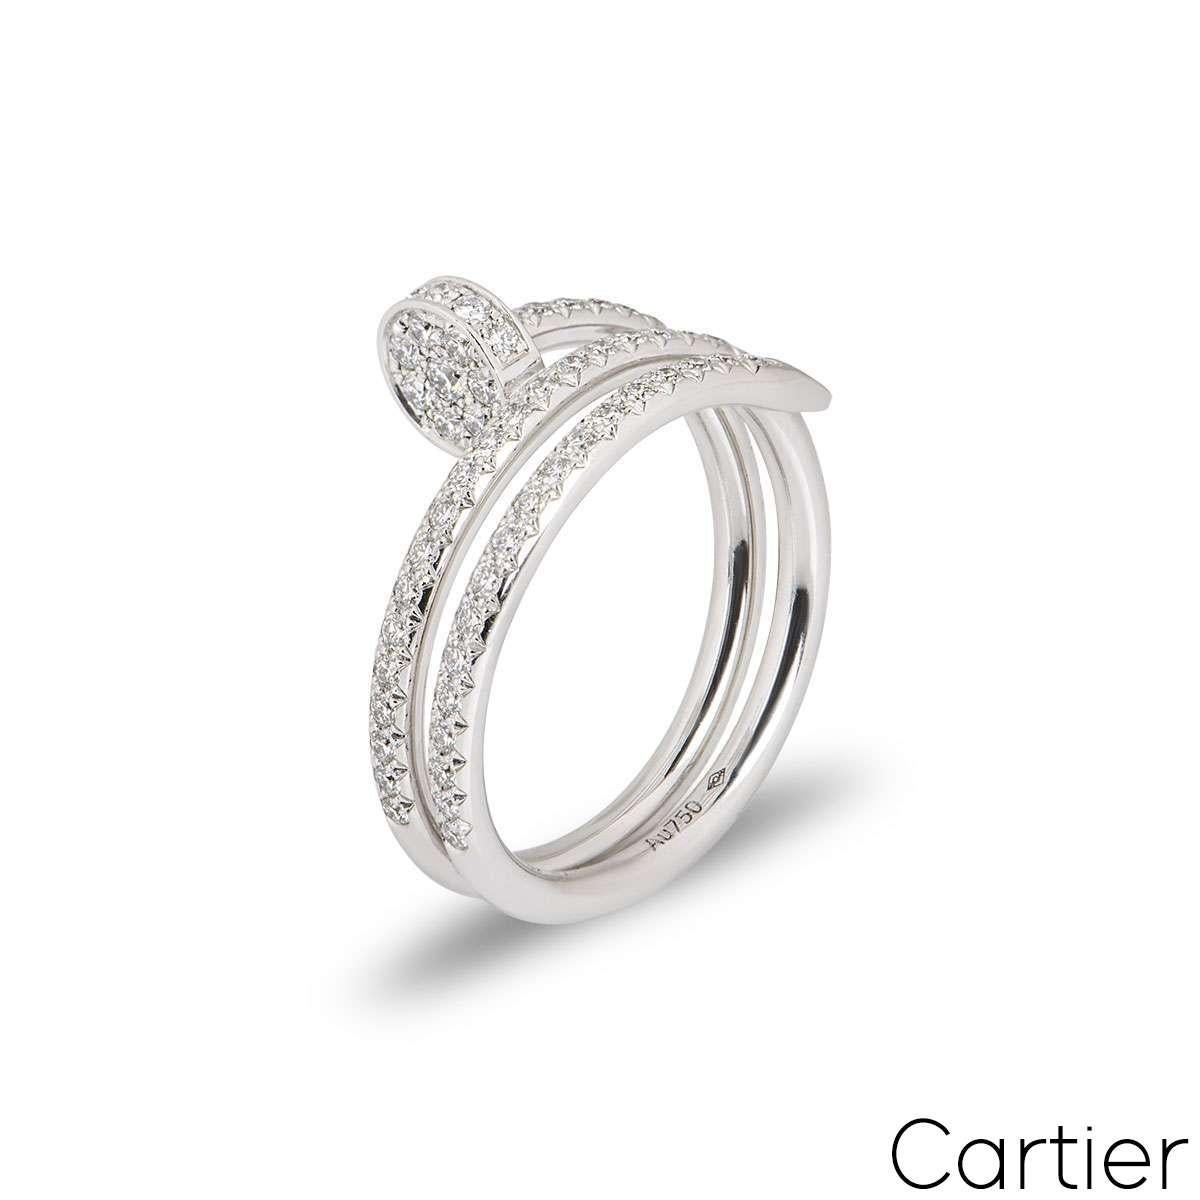 An 18k white gold double Juste un Clou ring by Cartier. The ring is in the style of a nail wrapping around the finger, set with round brilliant cut diamonds. There are 77 diamonds with a total diamond weight of 0.59ct. The is a UK size R 1/2/ US